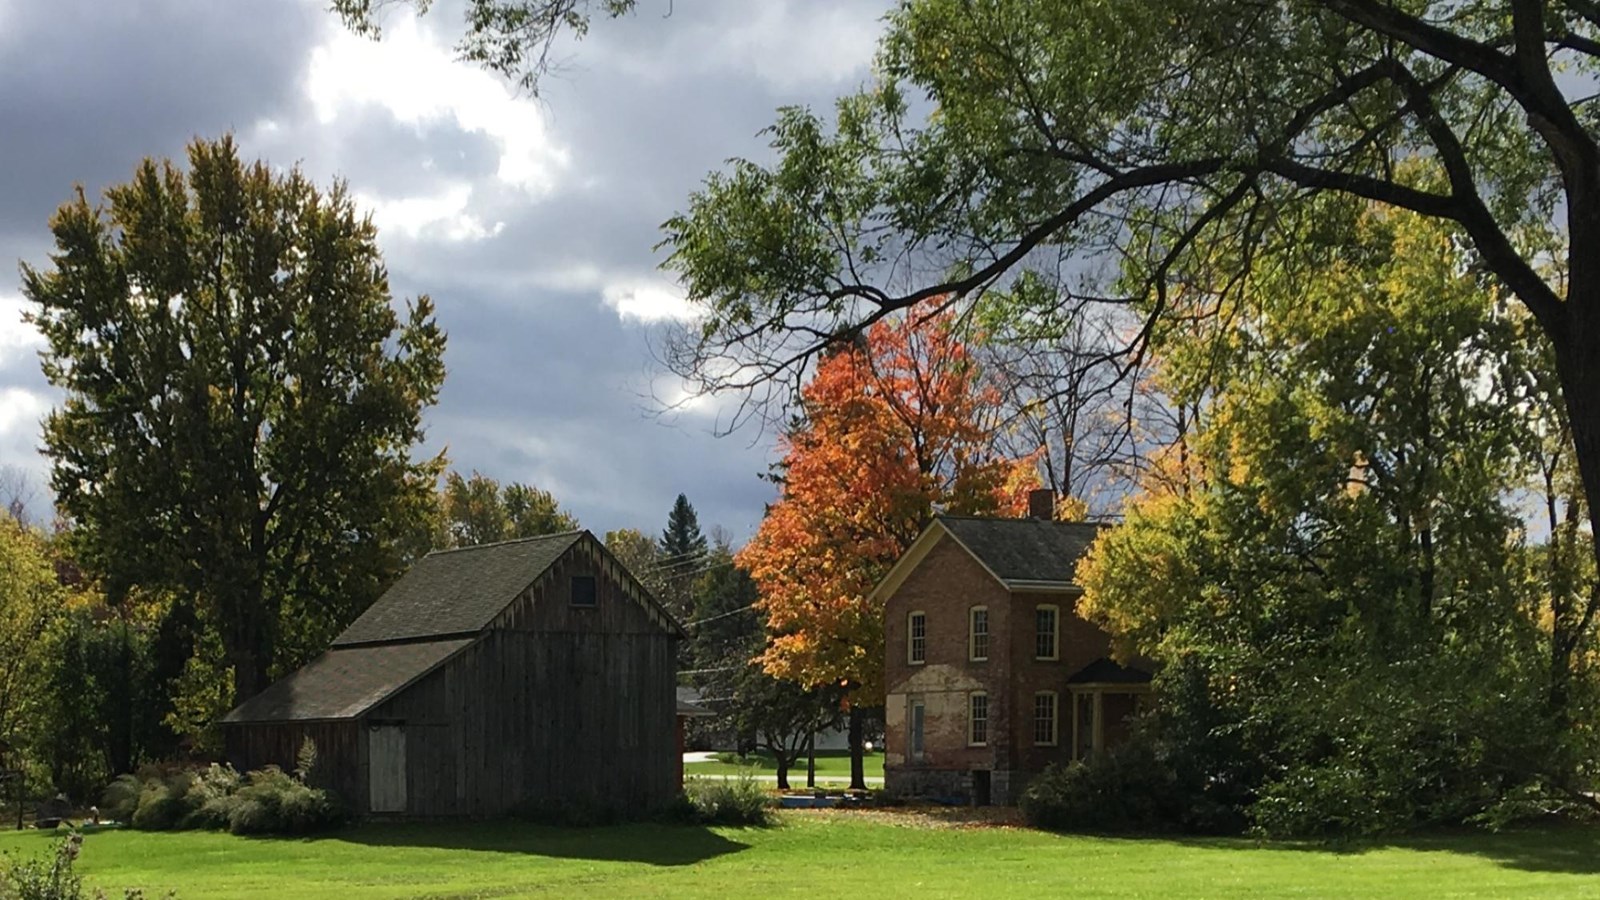 Tubman\'s brick house and wood barn with trees in fall. 